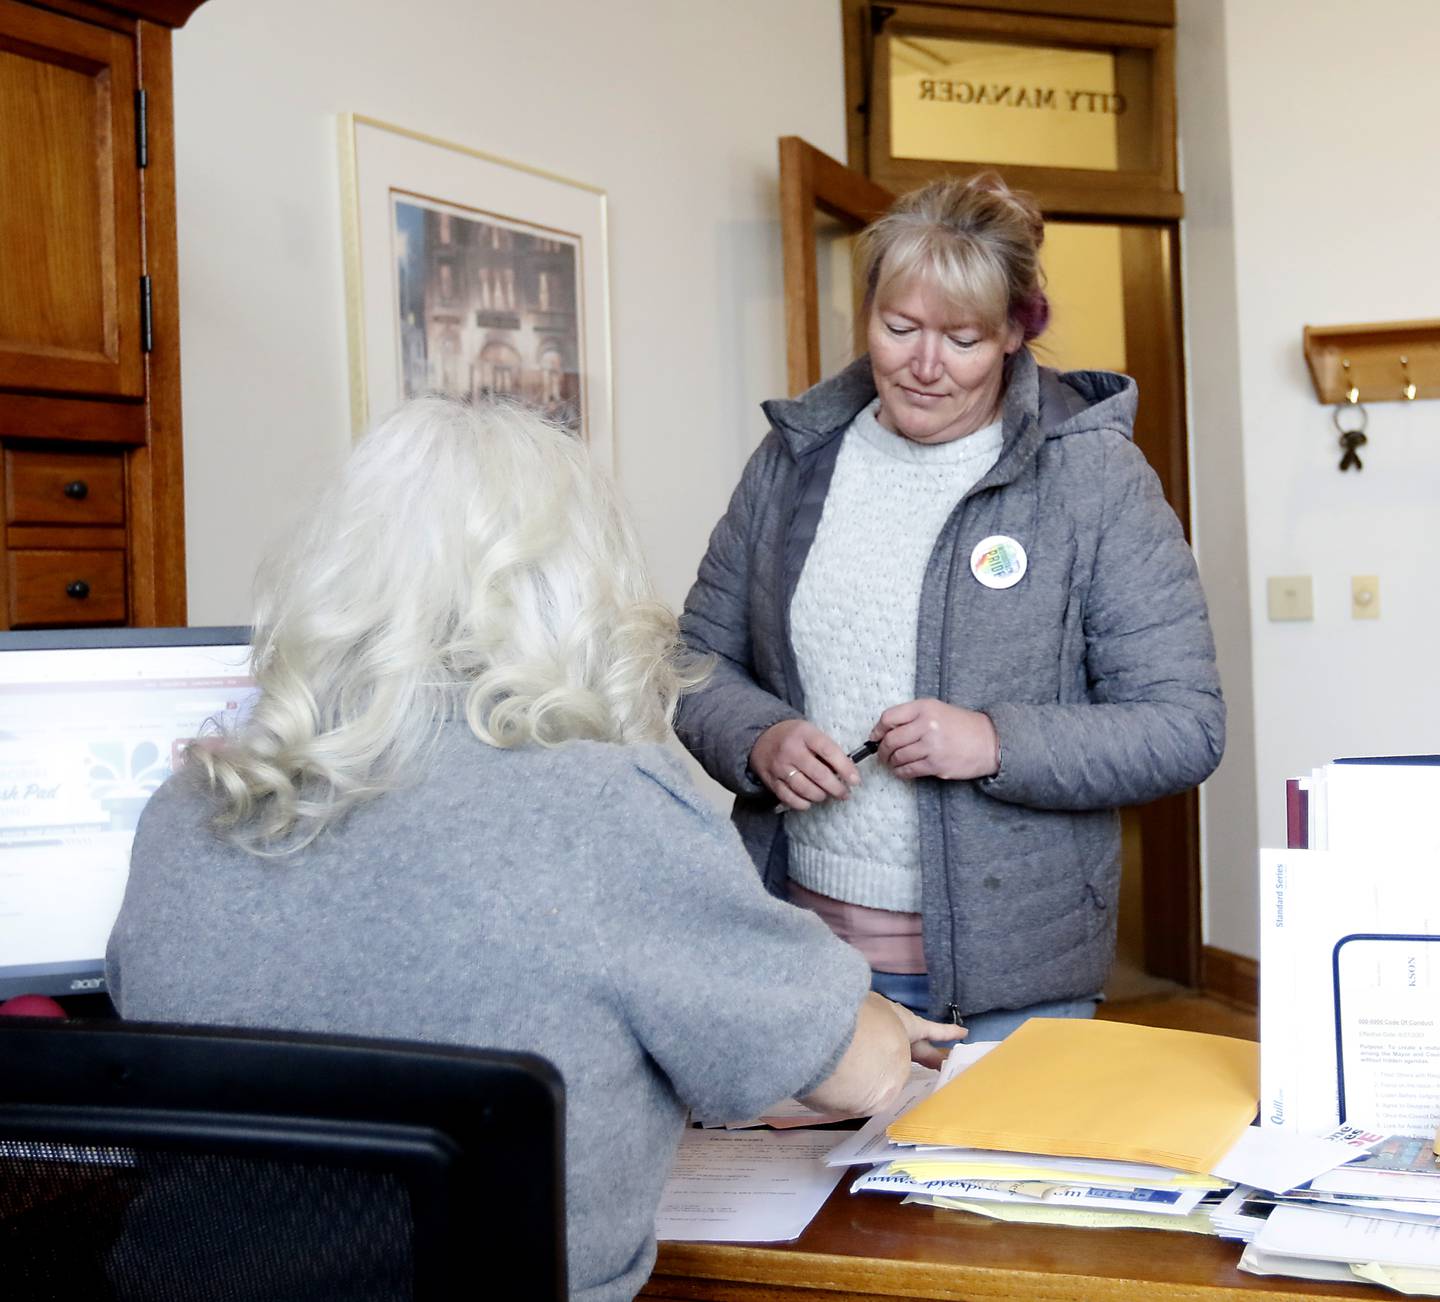 Melissa McMahon, who is running for the Woodstock City Council waits for Jane Howie, an executive assistant and election official with the city, to receive her candidate filing papers on Monday, Nov. 28, 2022, at City Hall. Monday was the last day to file for the cities of Woodstock and Crystal Lake.